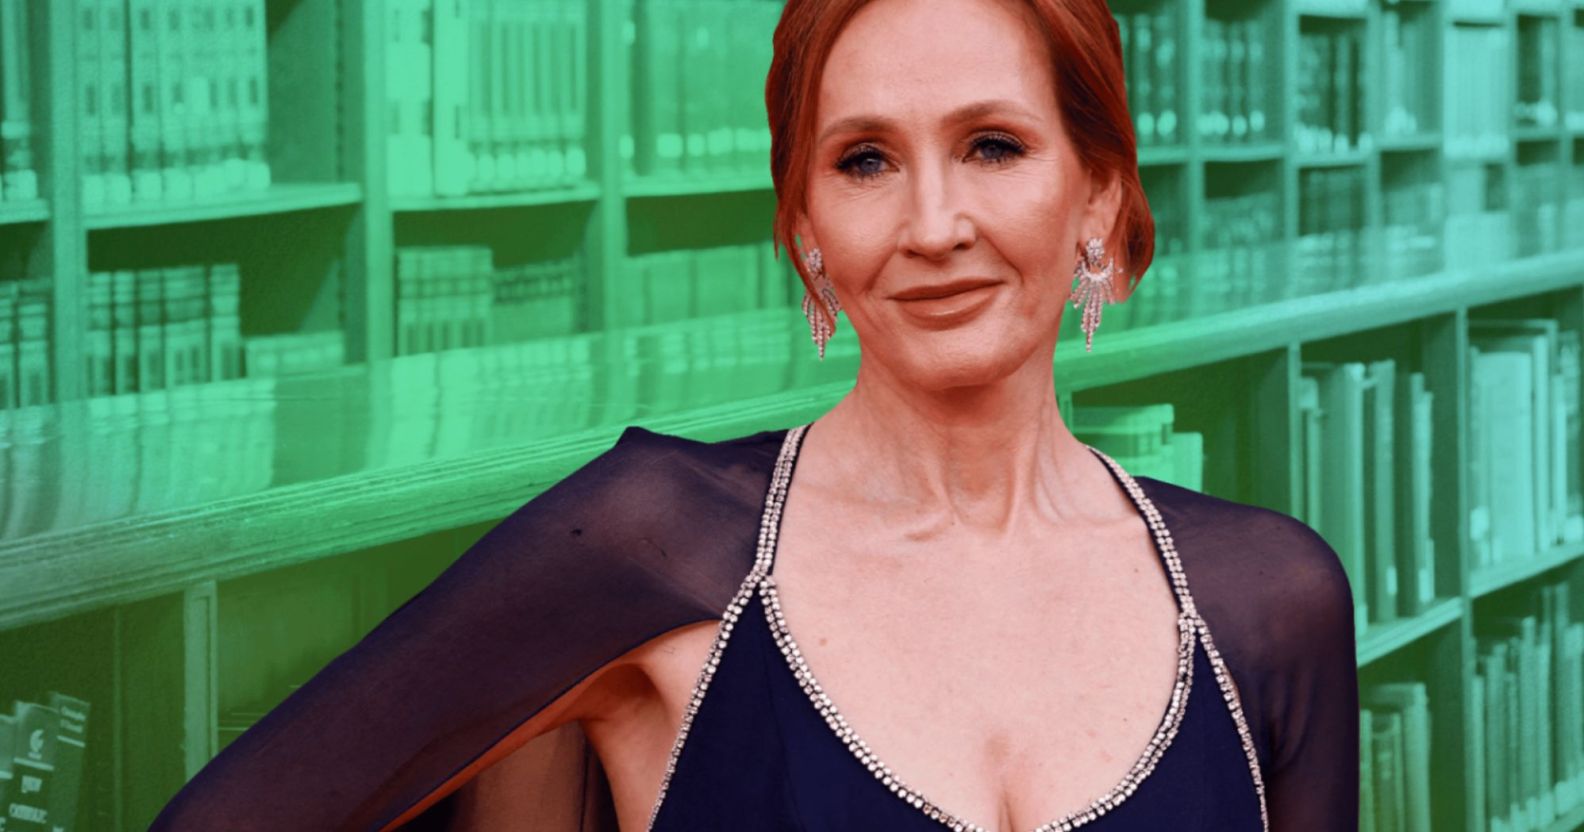 A graphic composed of an image of JK Rowling, who is wearing a dark dress with a cape, in front of a picture of books washed in a green colour